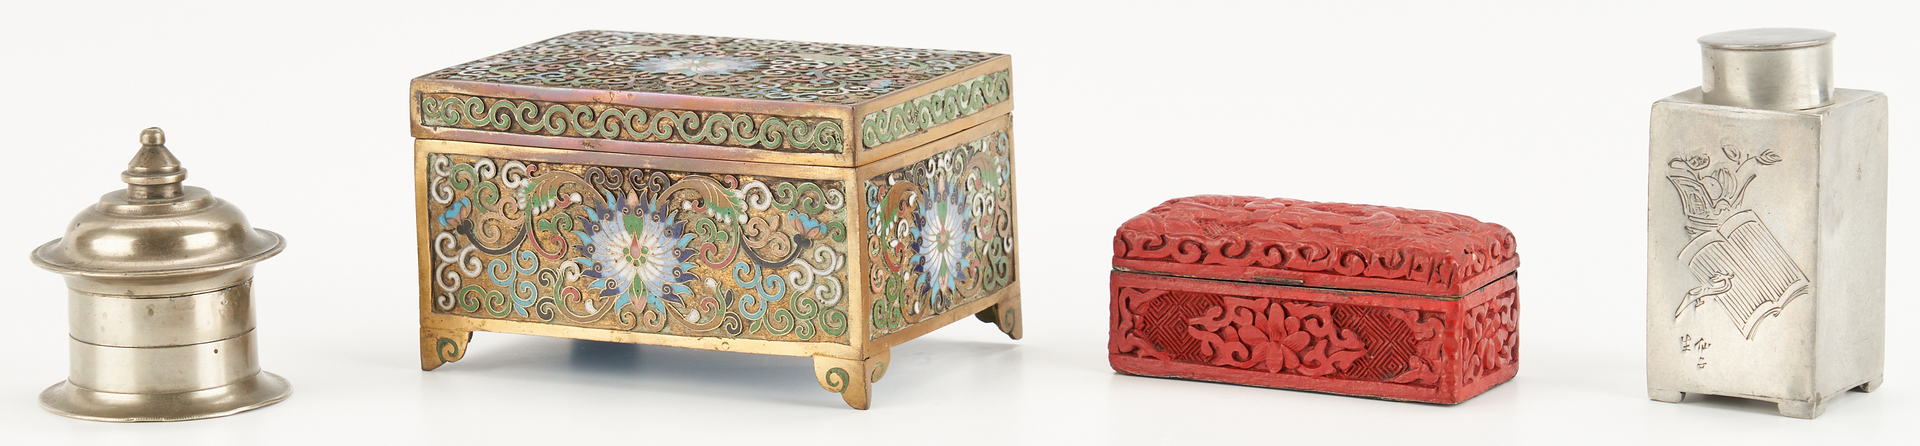 Lot 9: 8 Chinese Containers, incl. Pewter, Cloisonne, Cinnabar